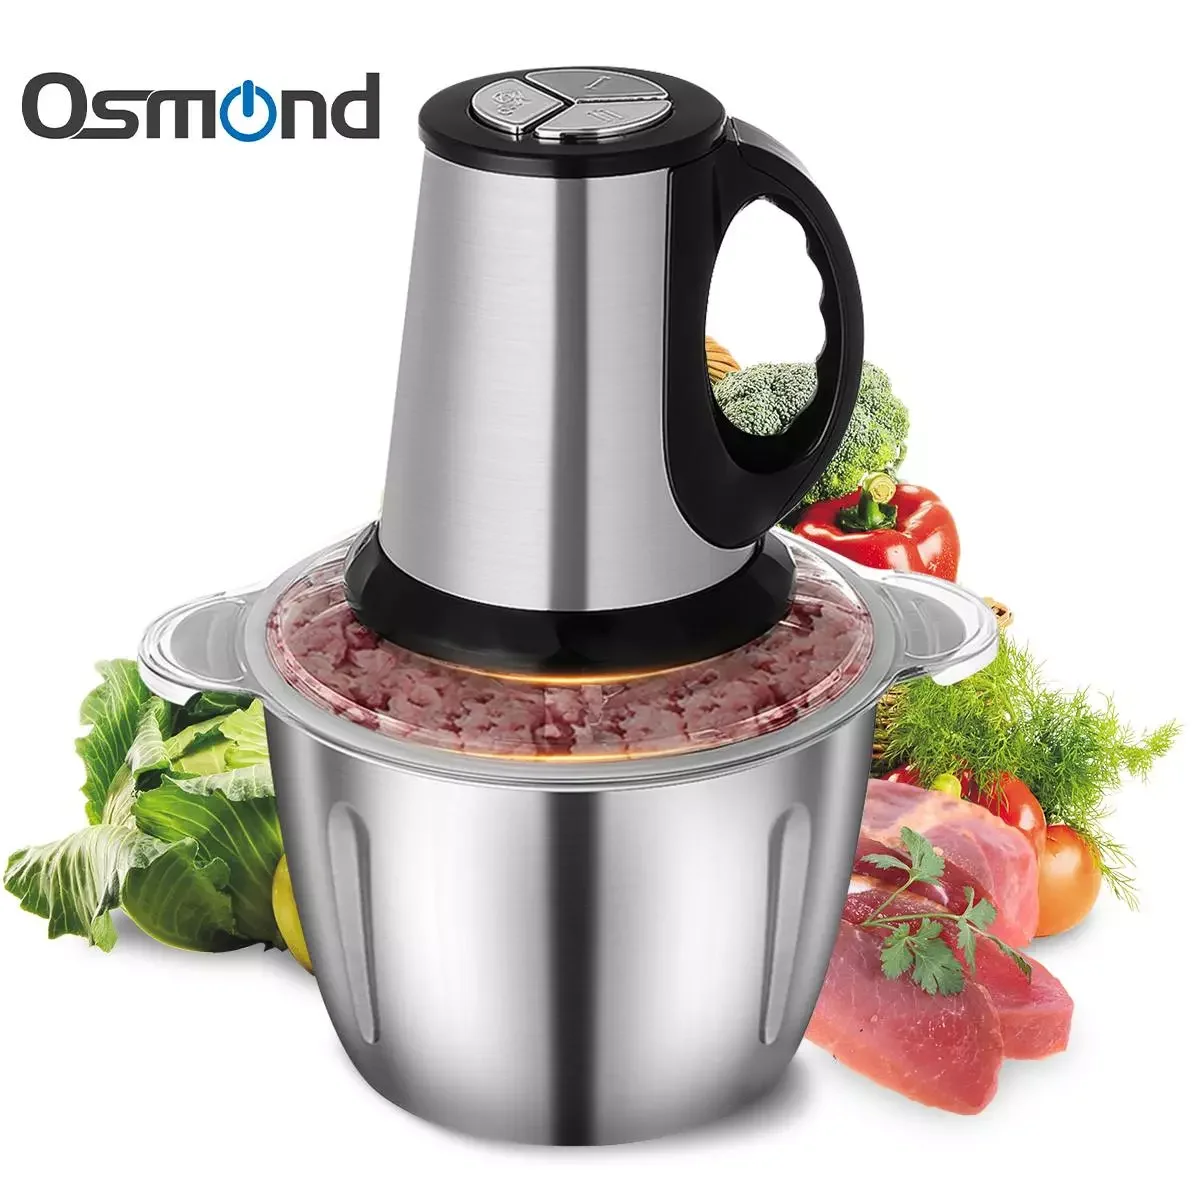 800W 3 Speed Stainless Steel Meat Grinder Chopper Electric Automatic Mincing Machine Household Grinder Food Processor Slicer